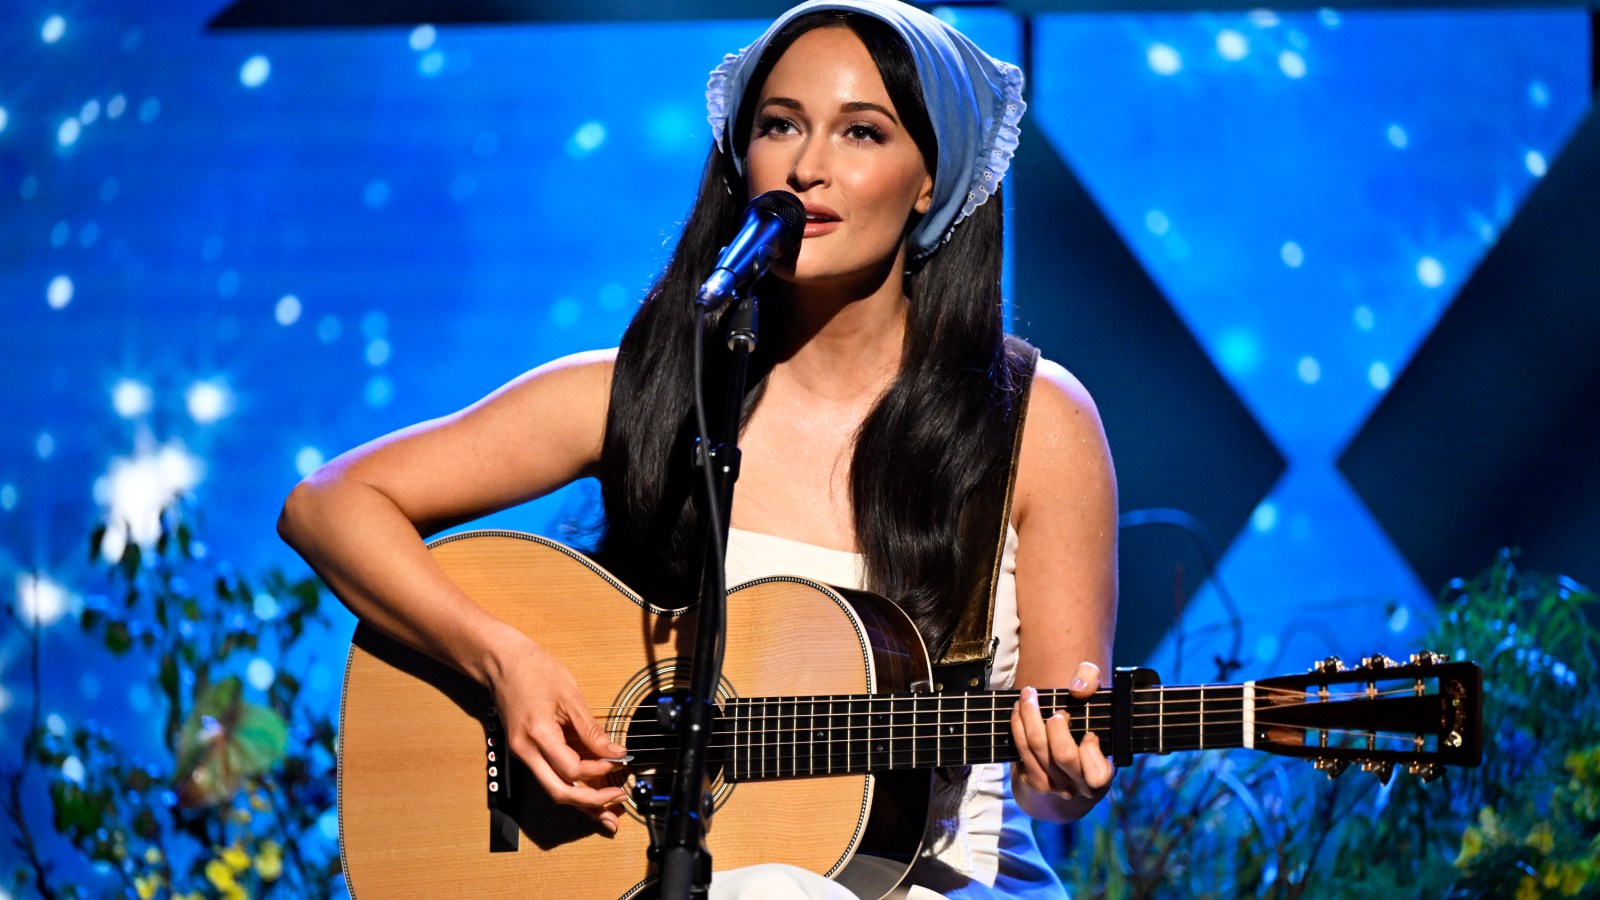 Watch Kacey Musgraves Perform Acoustic Number ‘The Architect’ on ‘Fallon’